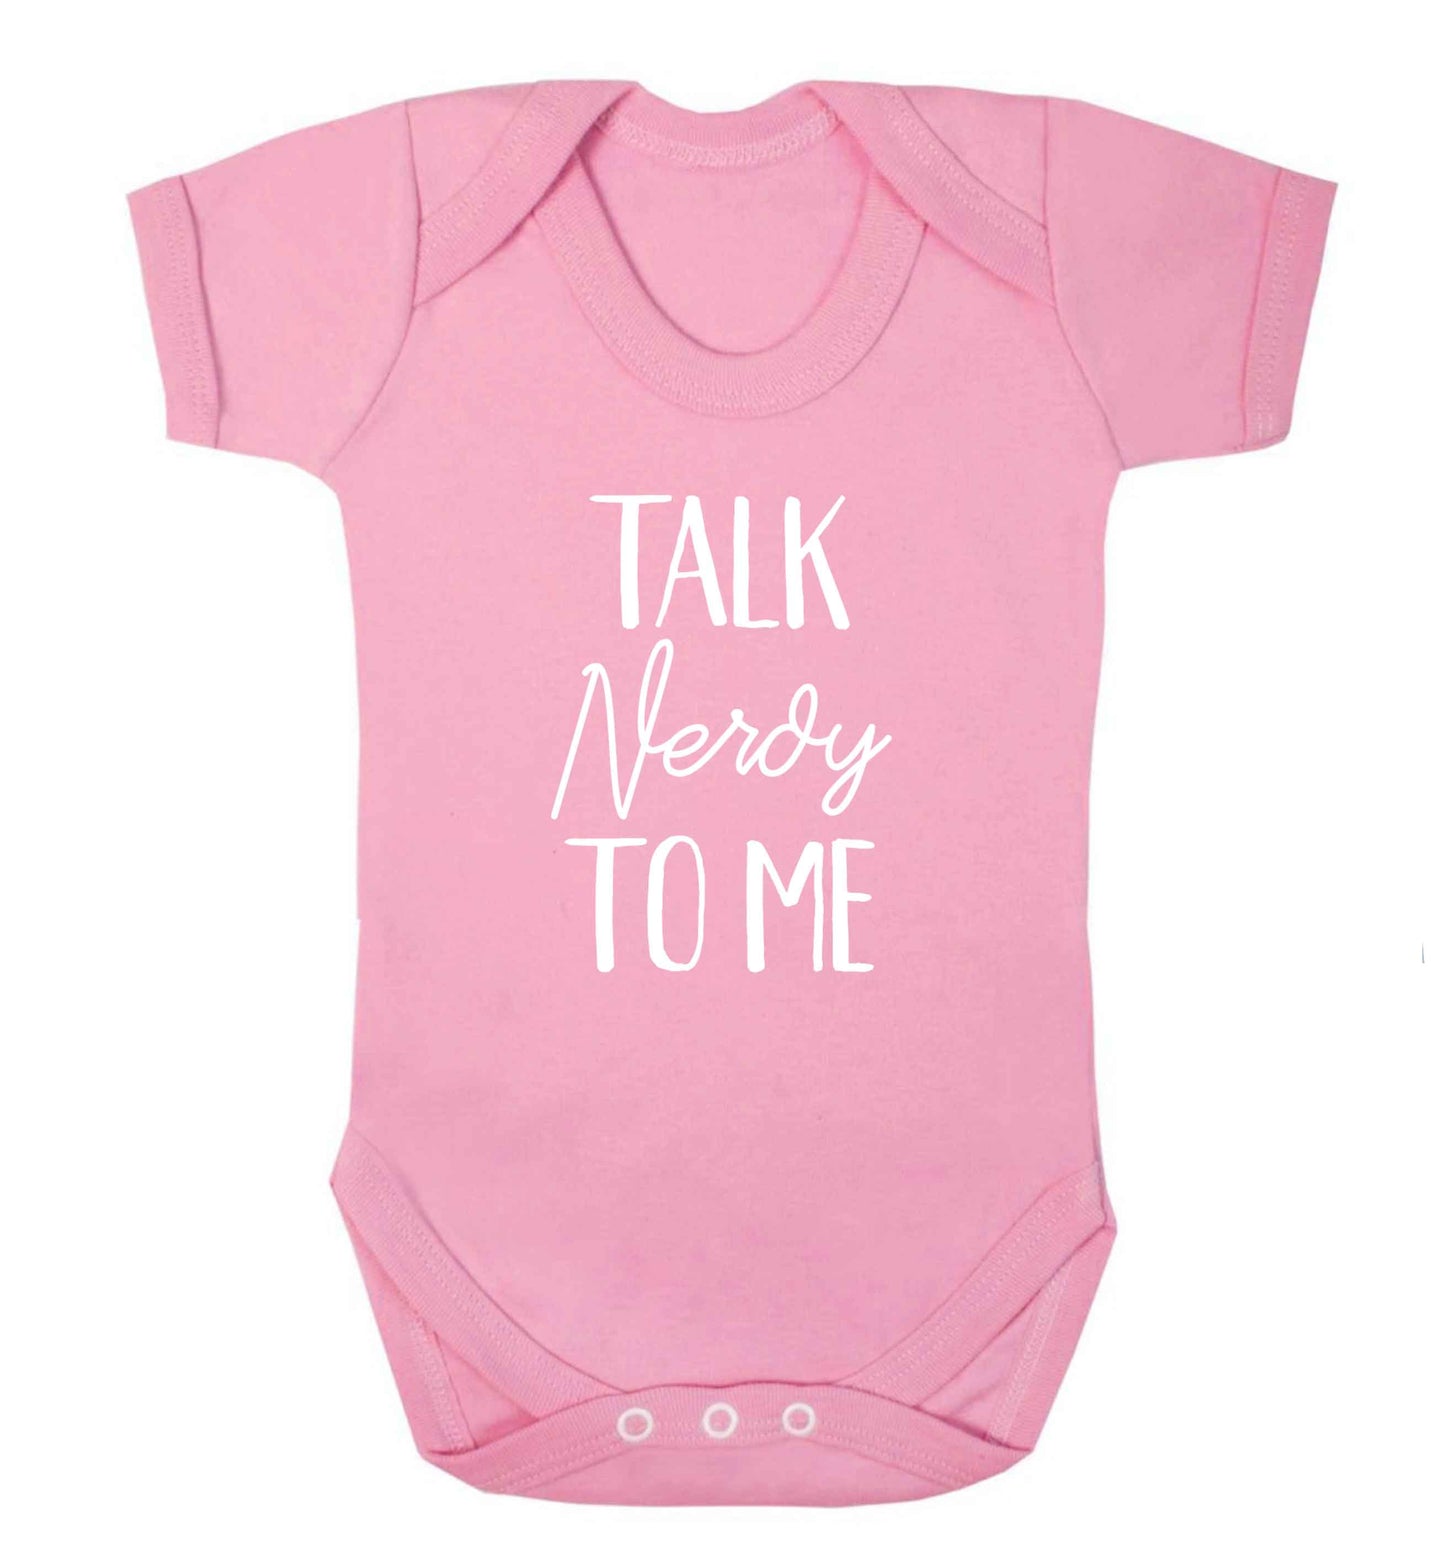 Talk nerdy to me baby vest pale pink 18-24 months